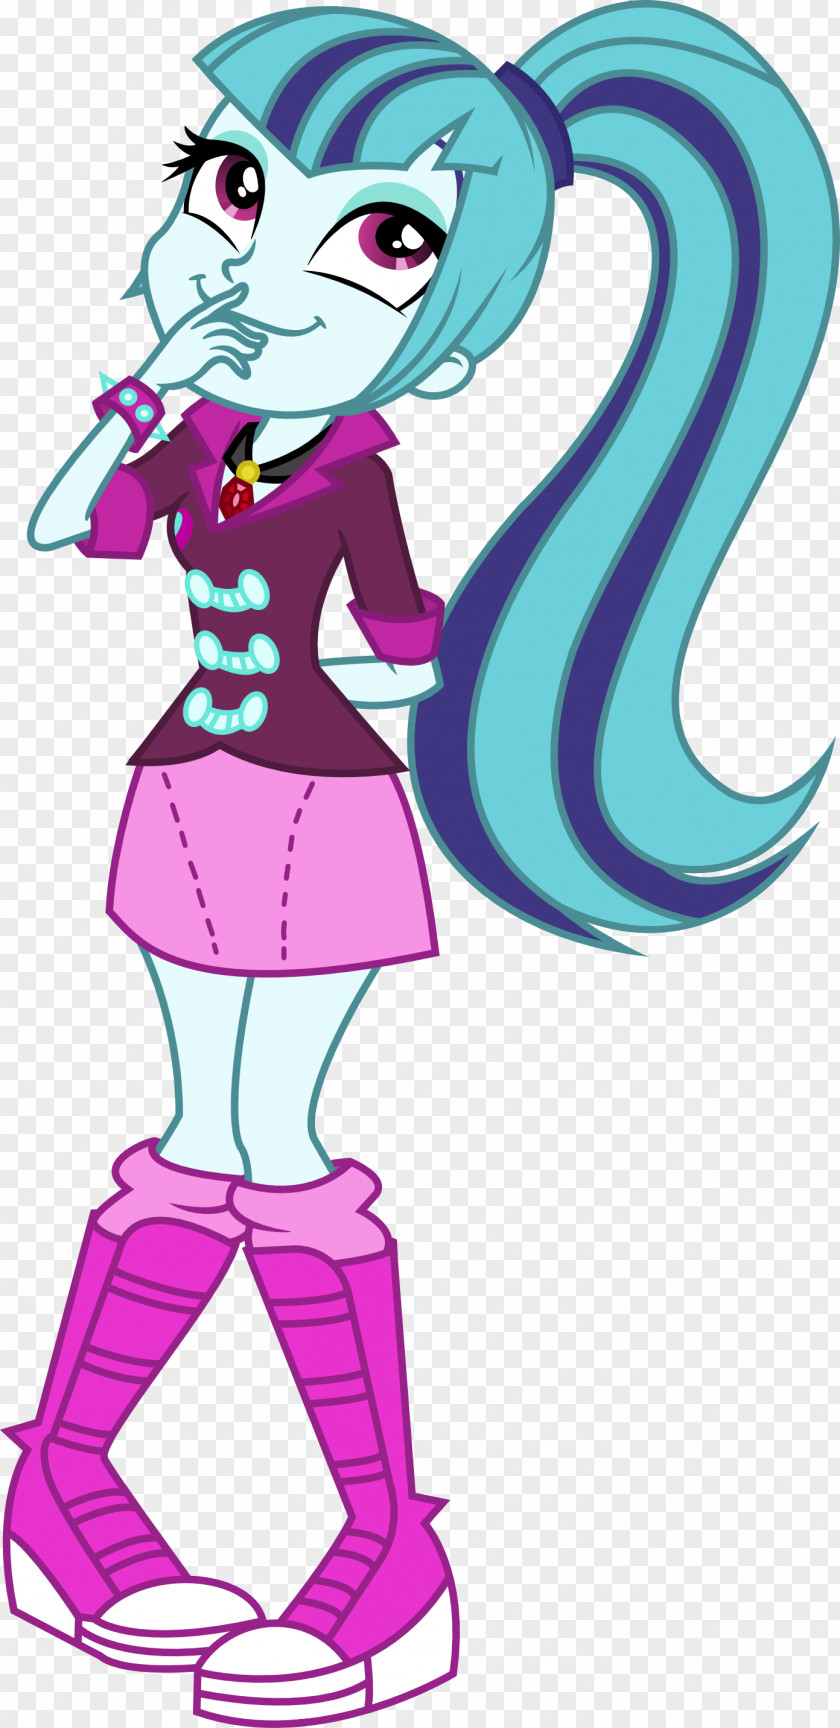 Dazzle Vector Twilight Sparkle Rarity Sunset Shimmer Rainbow Dash My Little Pony: Equestria Girls PNG